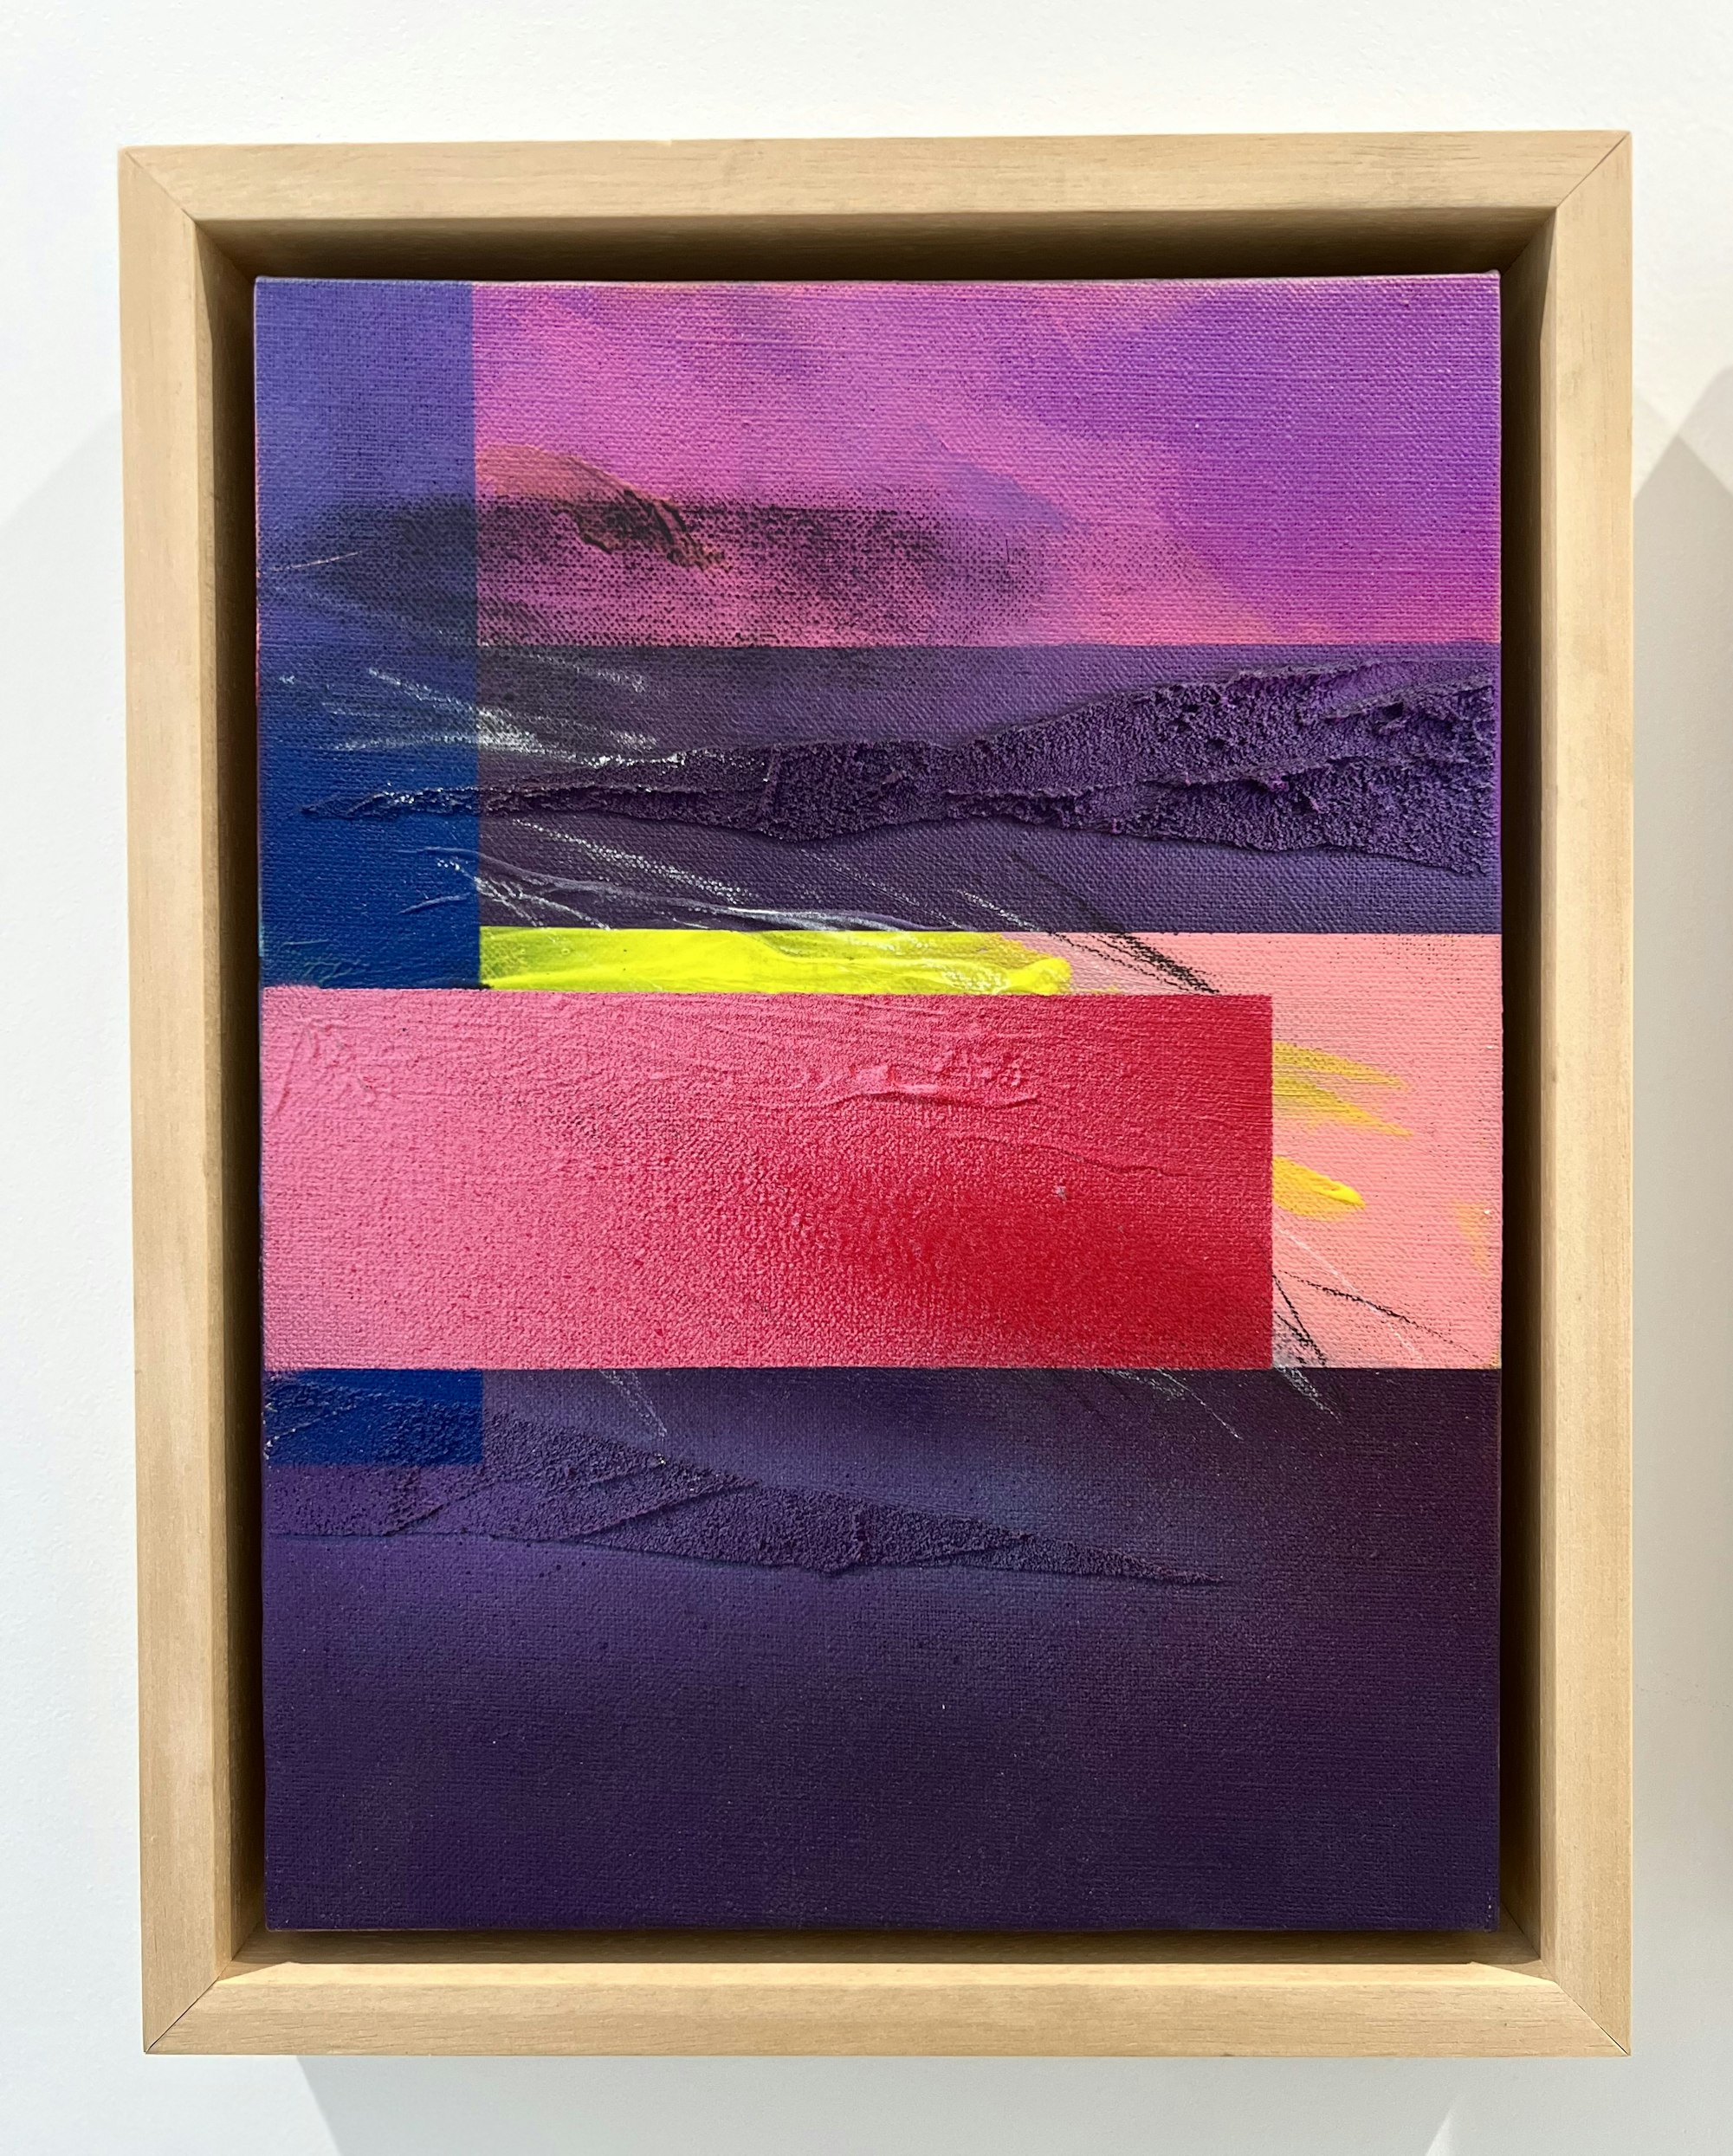 red rectangle over purple and pink mountain texture